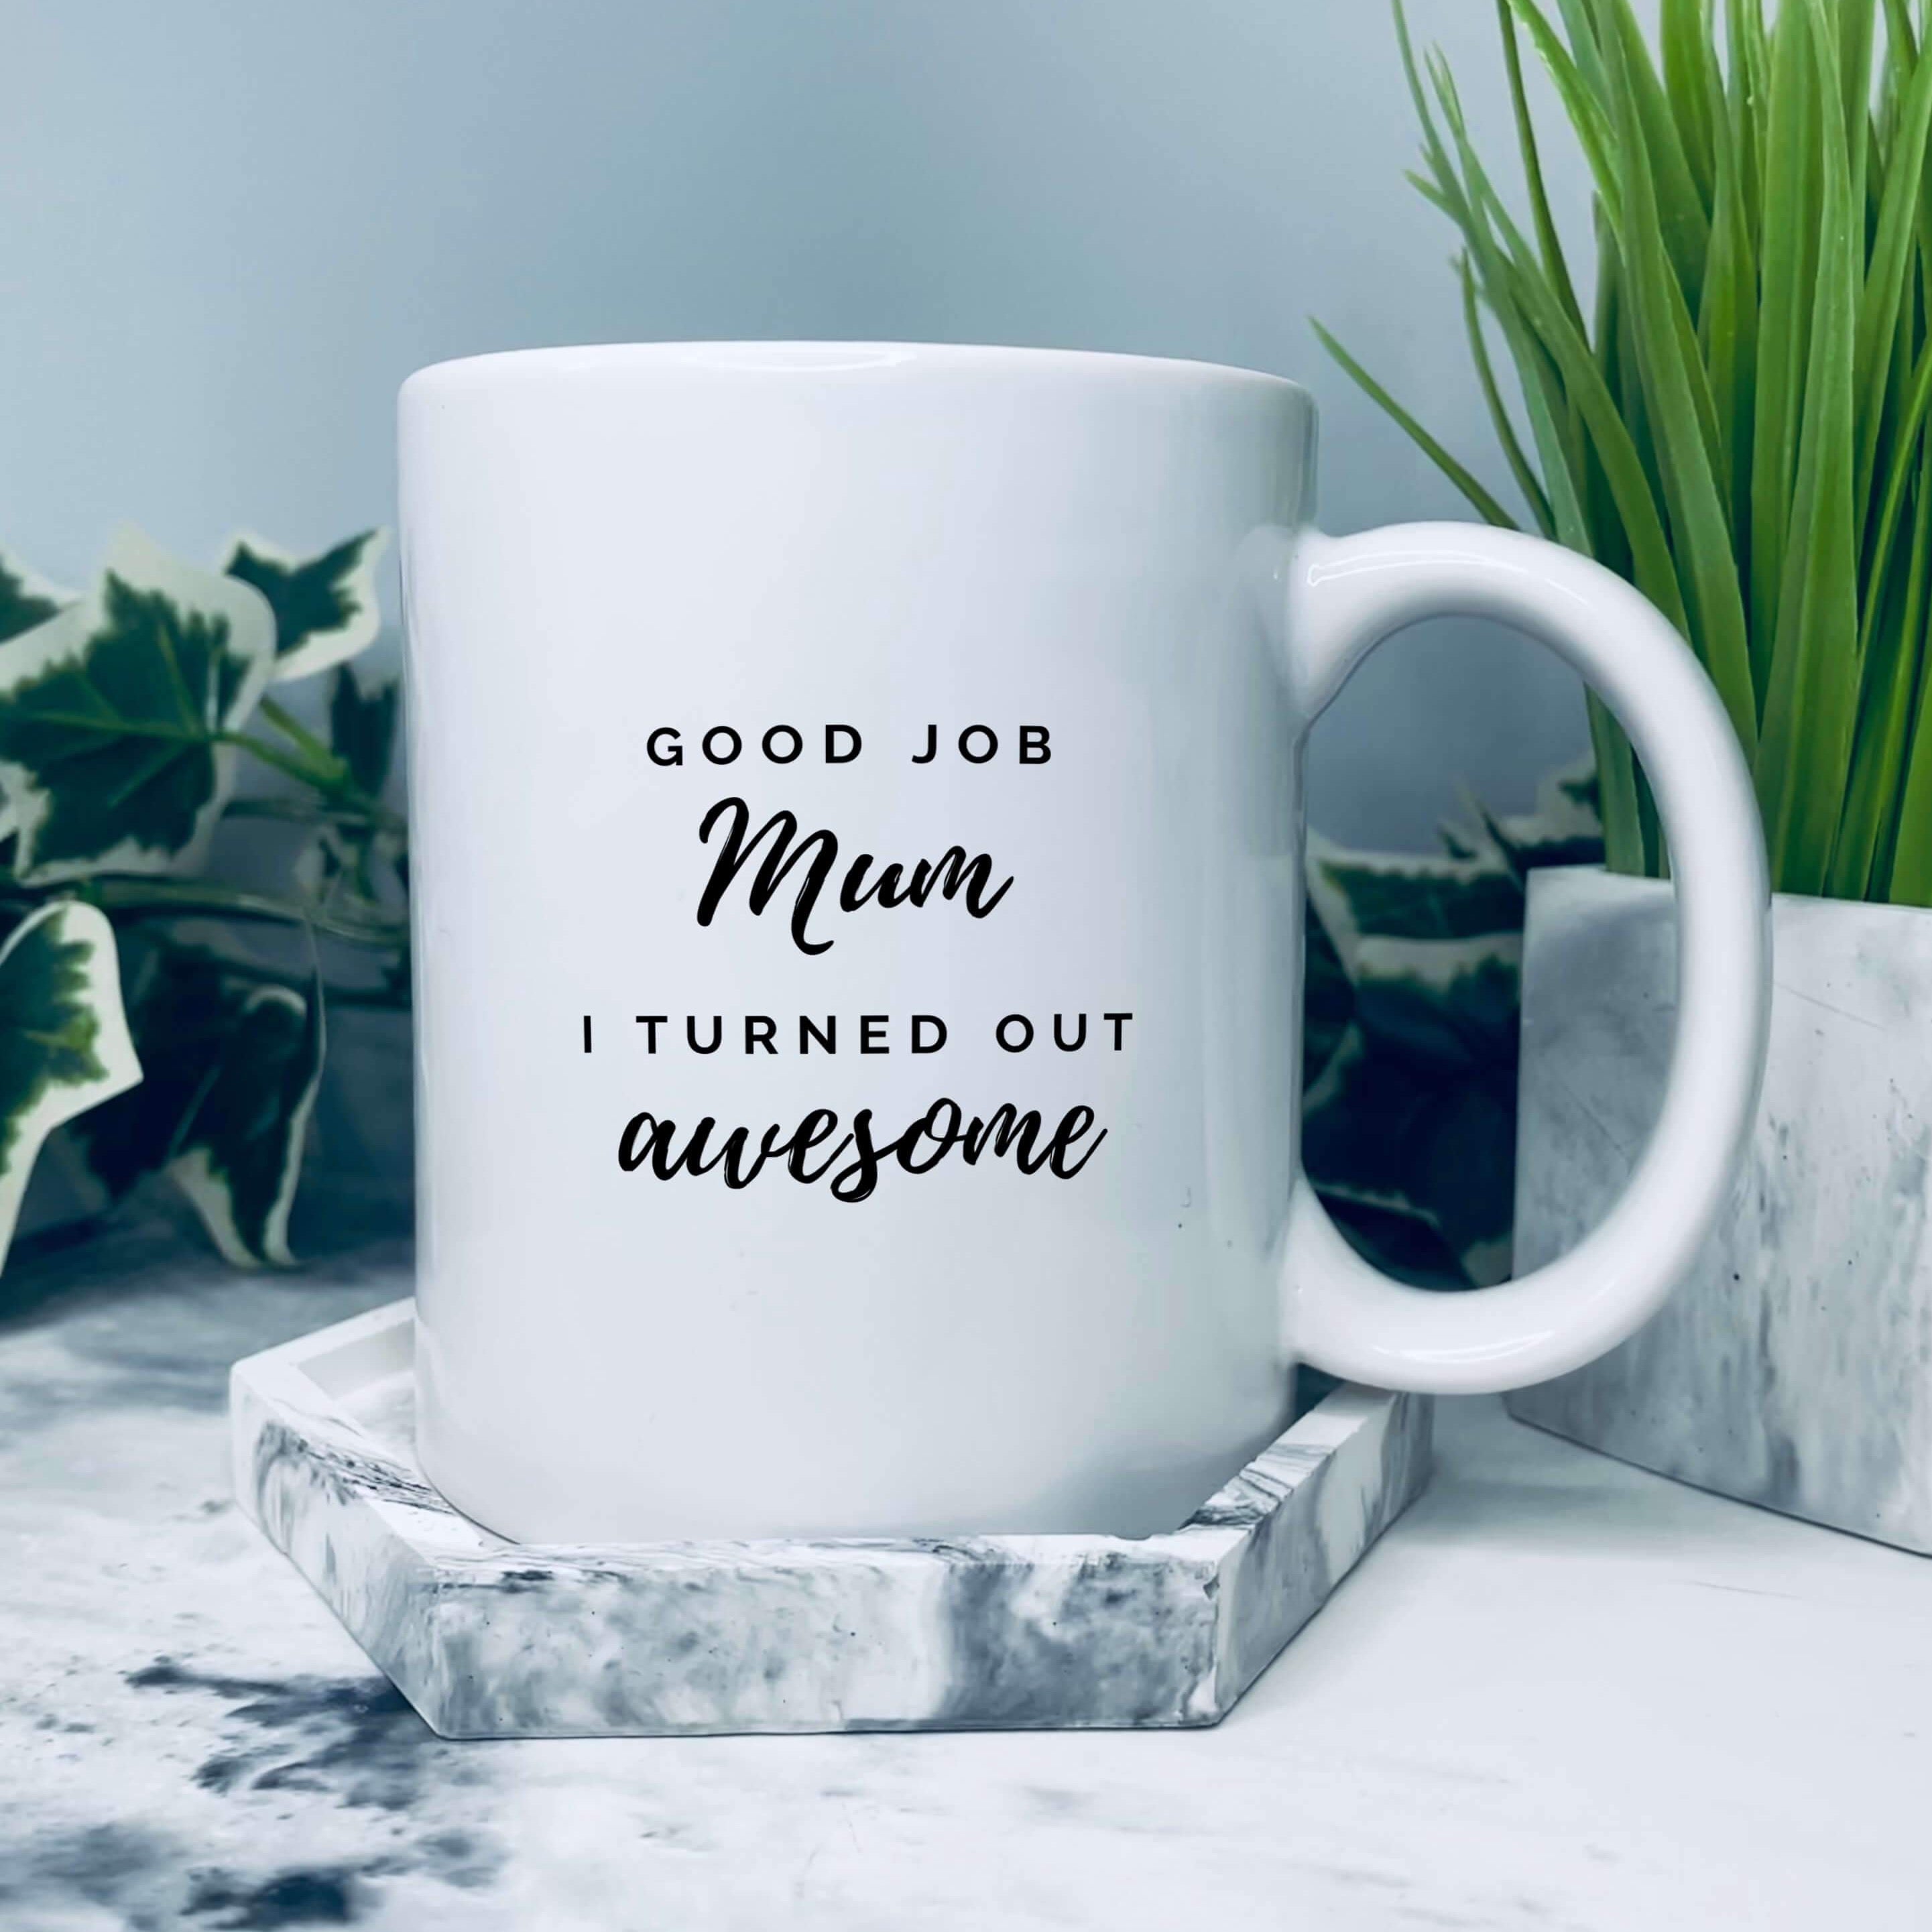 Mug with text on that says: Good job mum I turned out awesome. Mum and awesome are written in a slightly larger text in a handwriting style font, good job and I turned out awesome are in a sans serif caps style font. This allows for emphasis on the mum and awesome